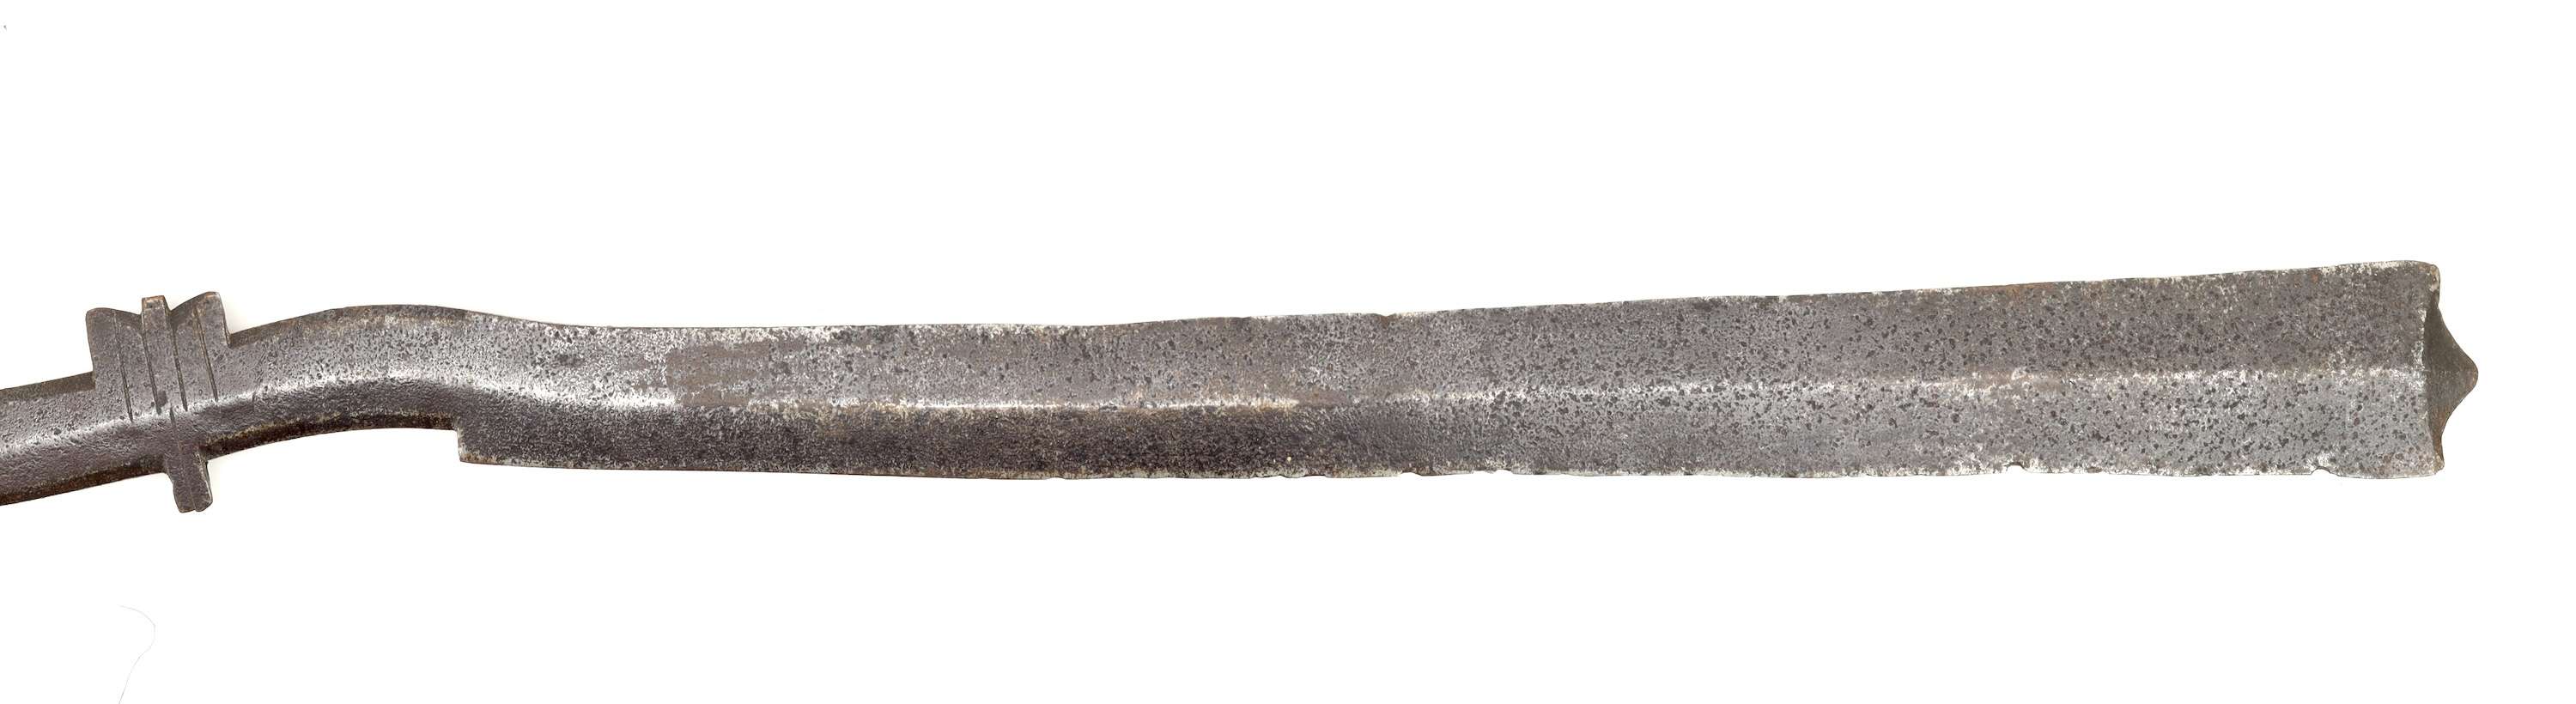 A milam sword of the Garo headhunters of Assam